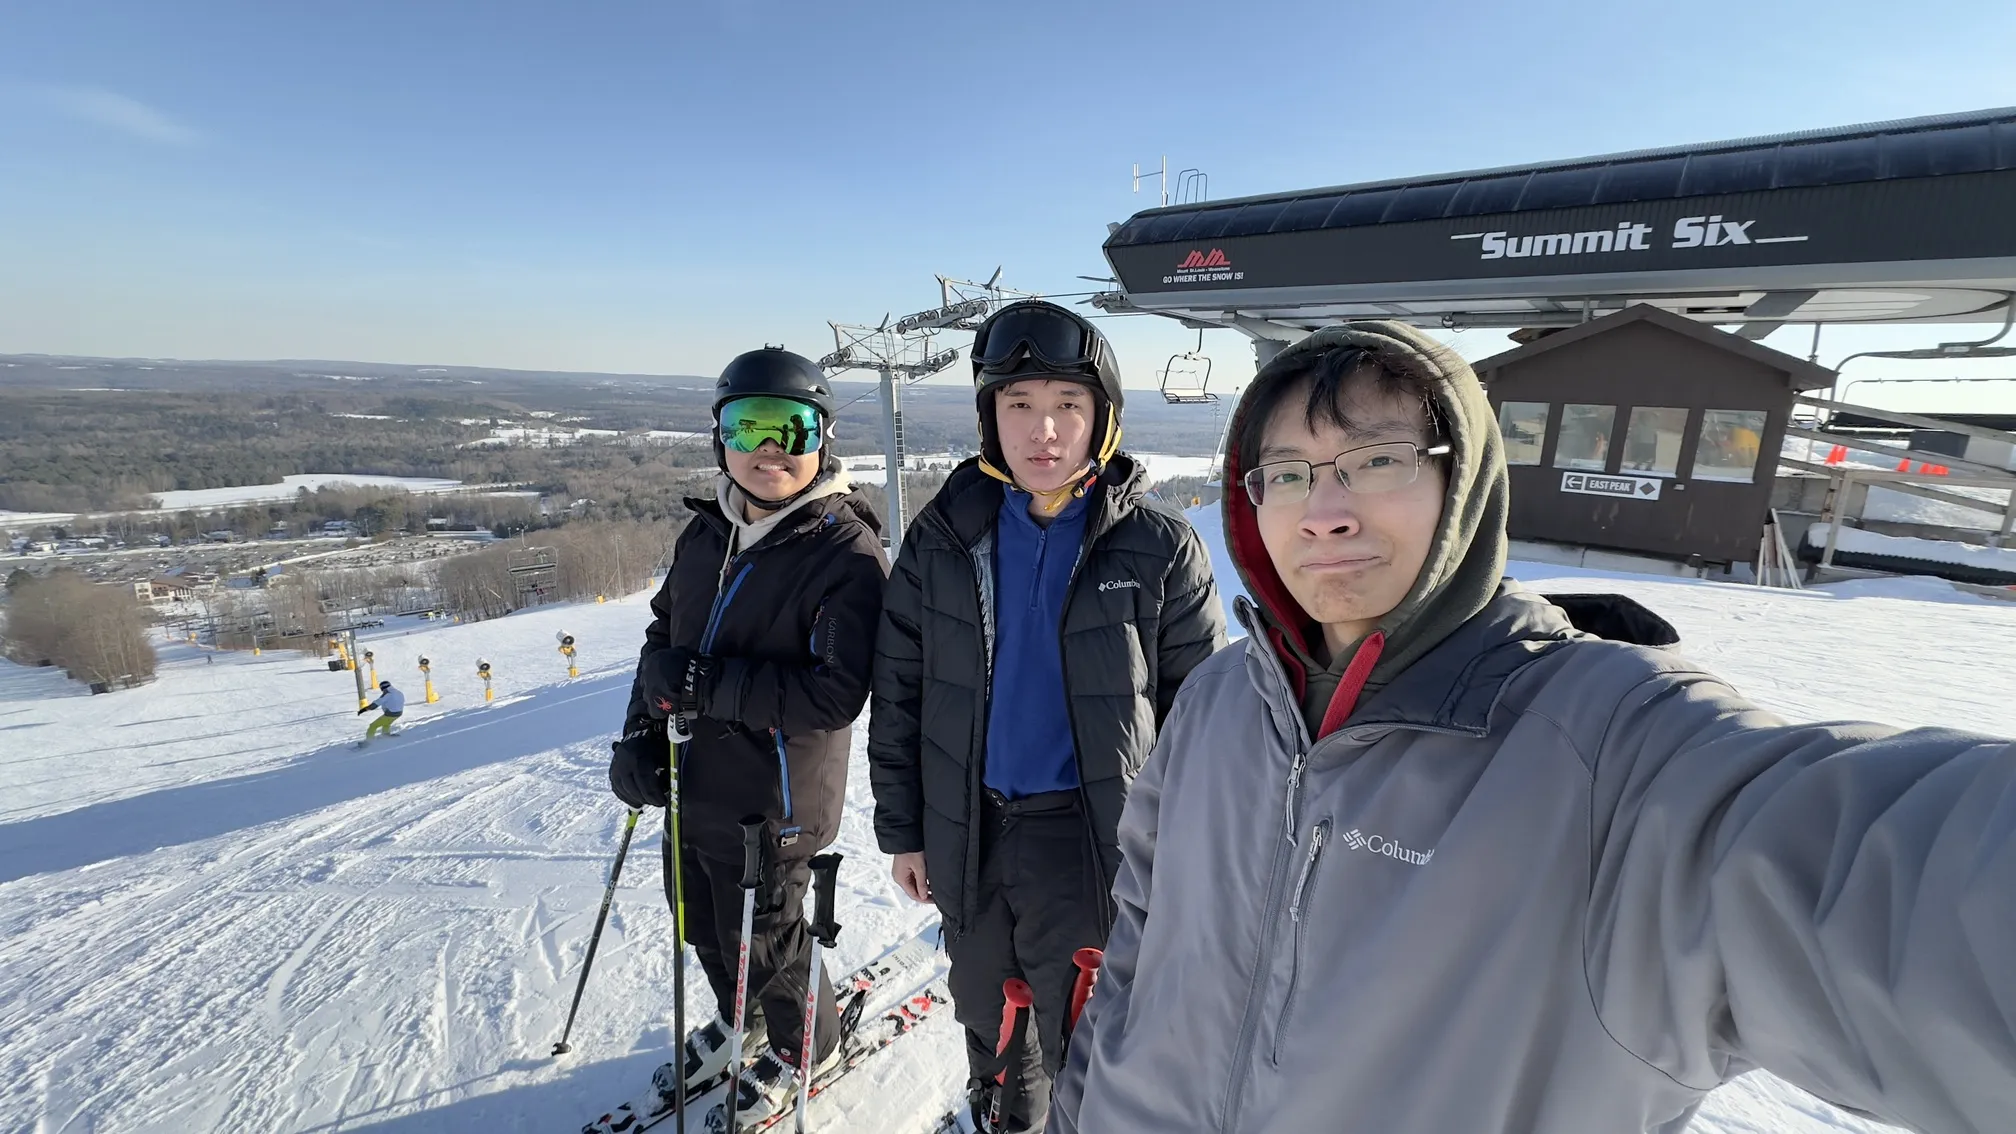 Skiing with friends at Mount St. Louis Moonstone. Me at centre, Jay on the right and Mackenzie on the left.